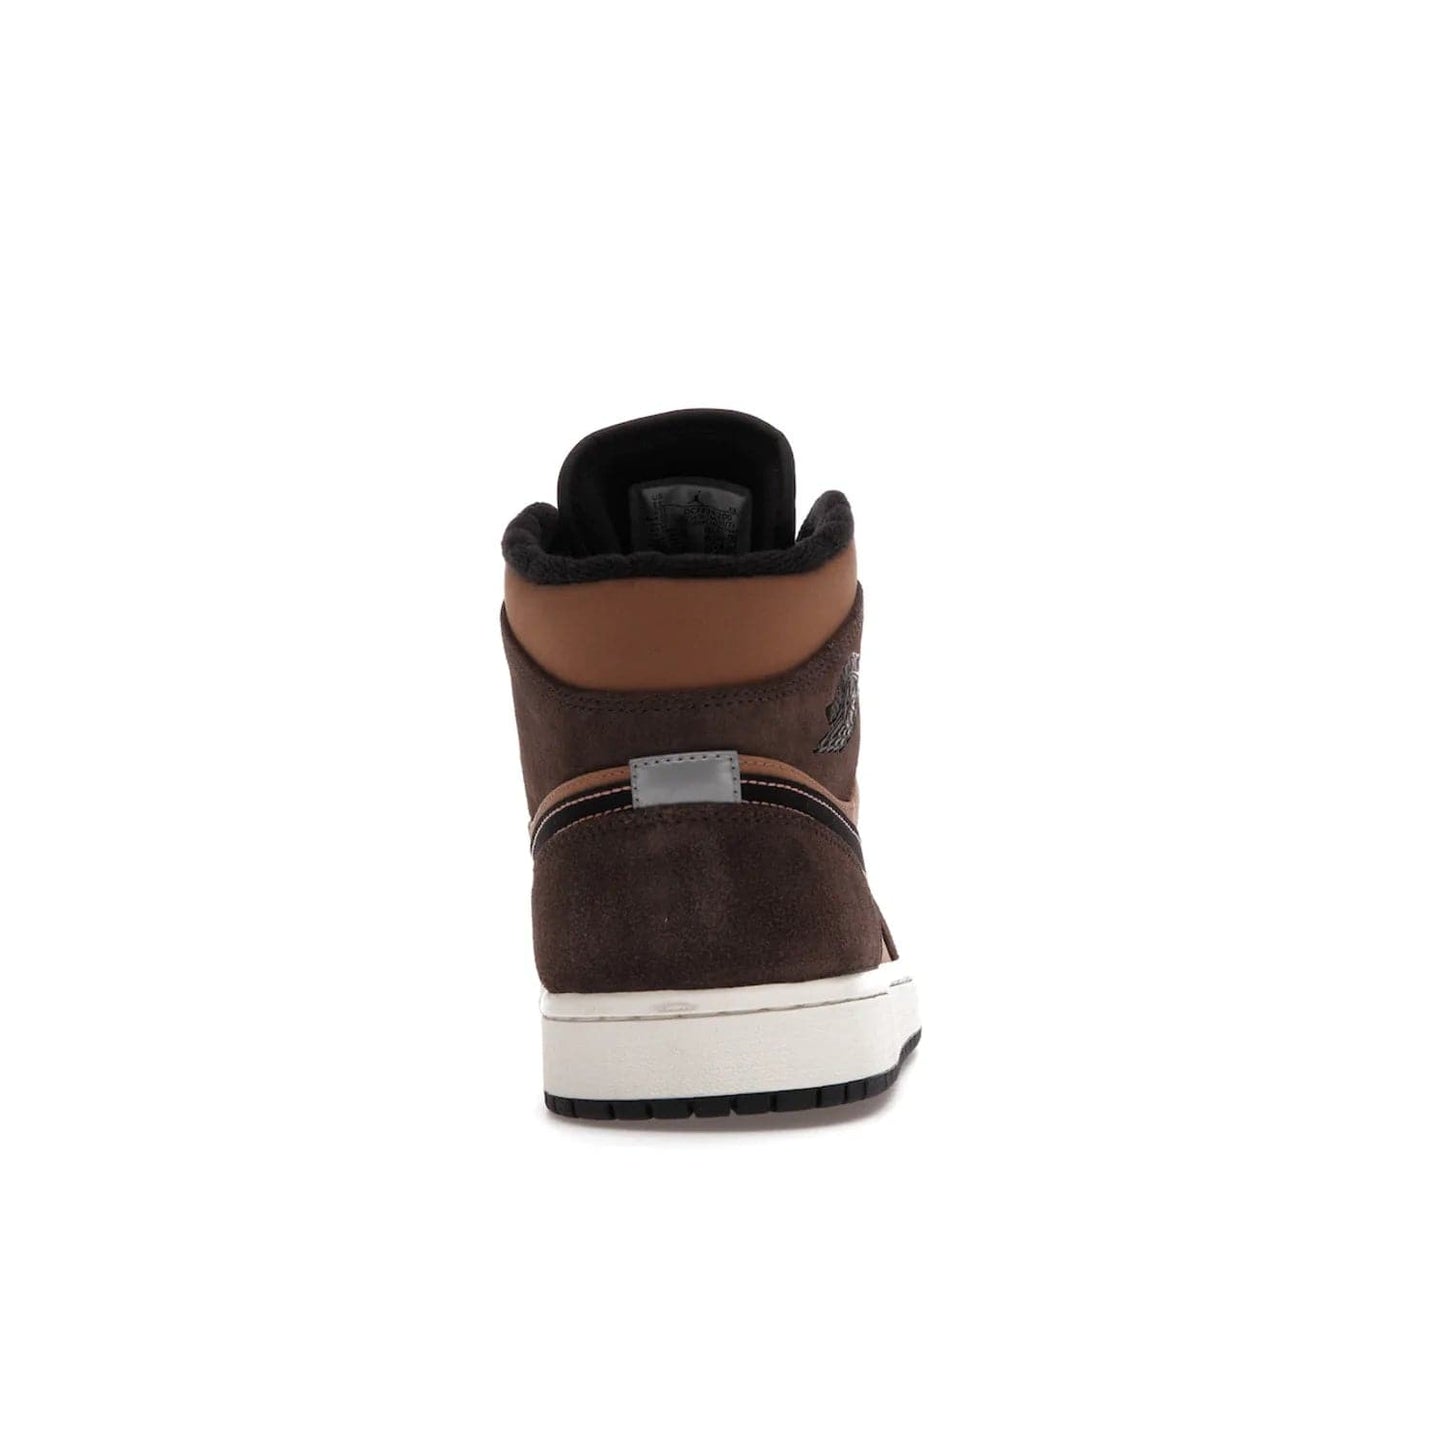 Jordan 1 Mid SE Dark Chocolate - Image 28 - Only at www.BallersClubKickz.com - This fashionable and functional Jordan 1 Mid SE Dark Chocolate features a light brown Durabuck upper, dark brown suede overlays, black Swoosh logos and reflective patch at heel. A must-have for any sneakerhead!